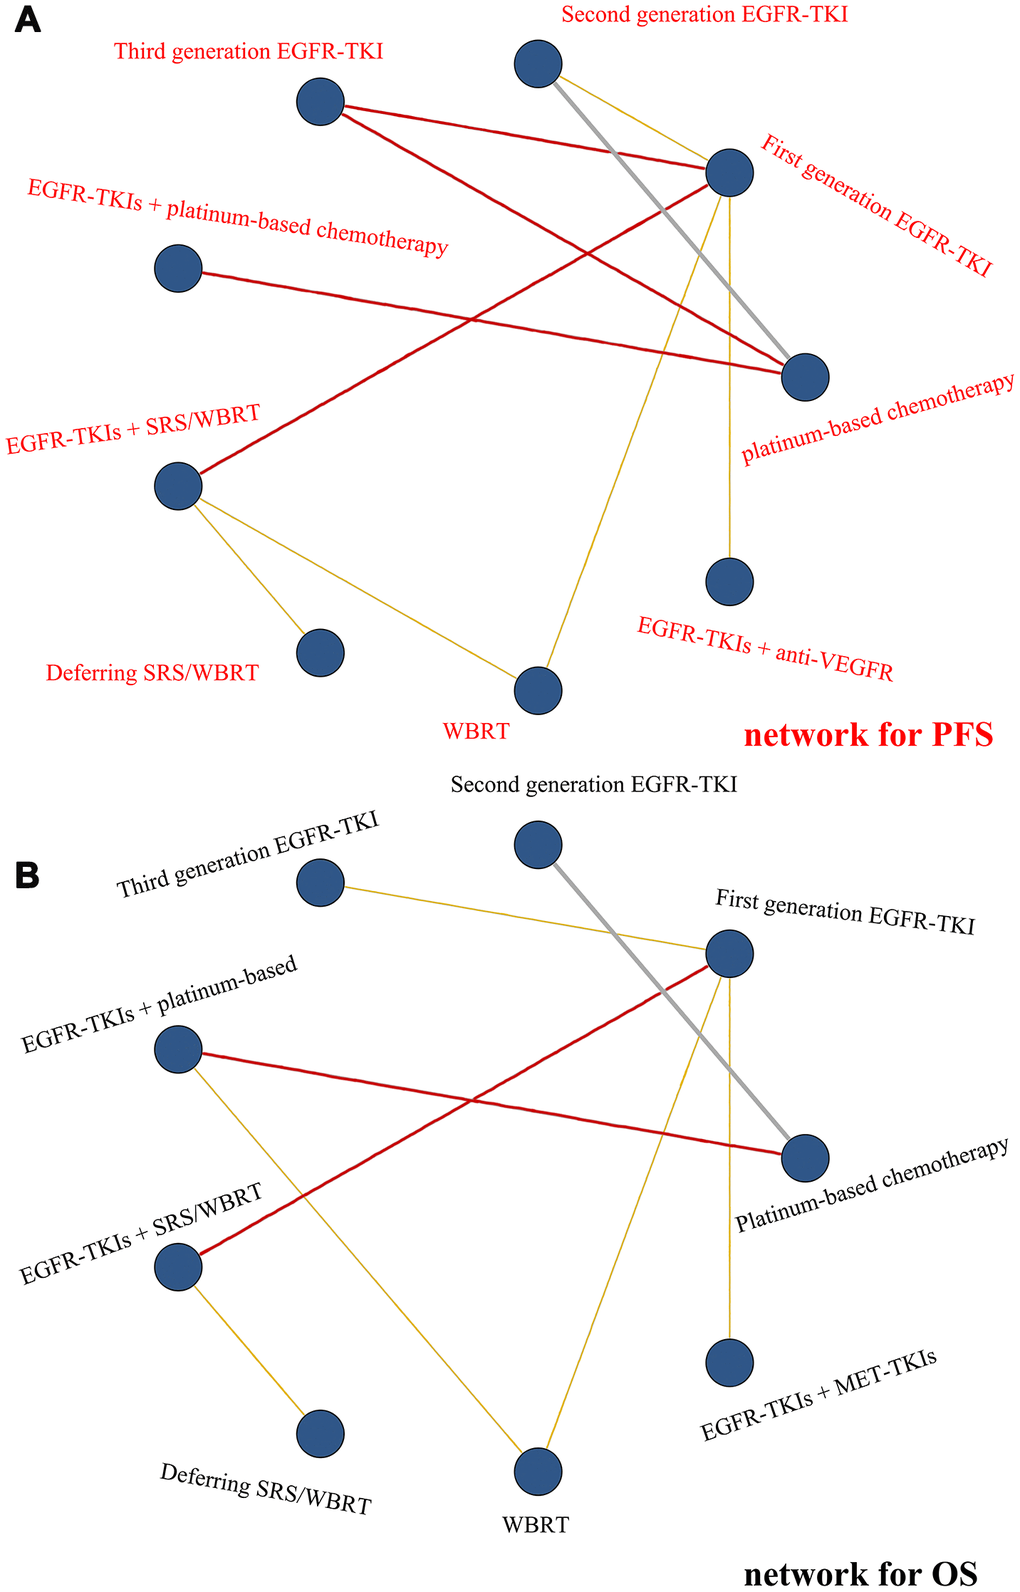 Networks of comparisons of the multiple treatments with regard to efficacy. (A) Network for PFS and (B) network for OS. Each node corresponds to a treatment included in the analysis. Each line corresponds to direct comparisons between treatments with the width corresponding to the number of direct within-trial comparisons. Treatments are listed around each node.